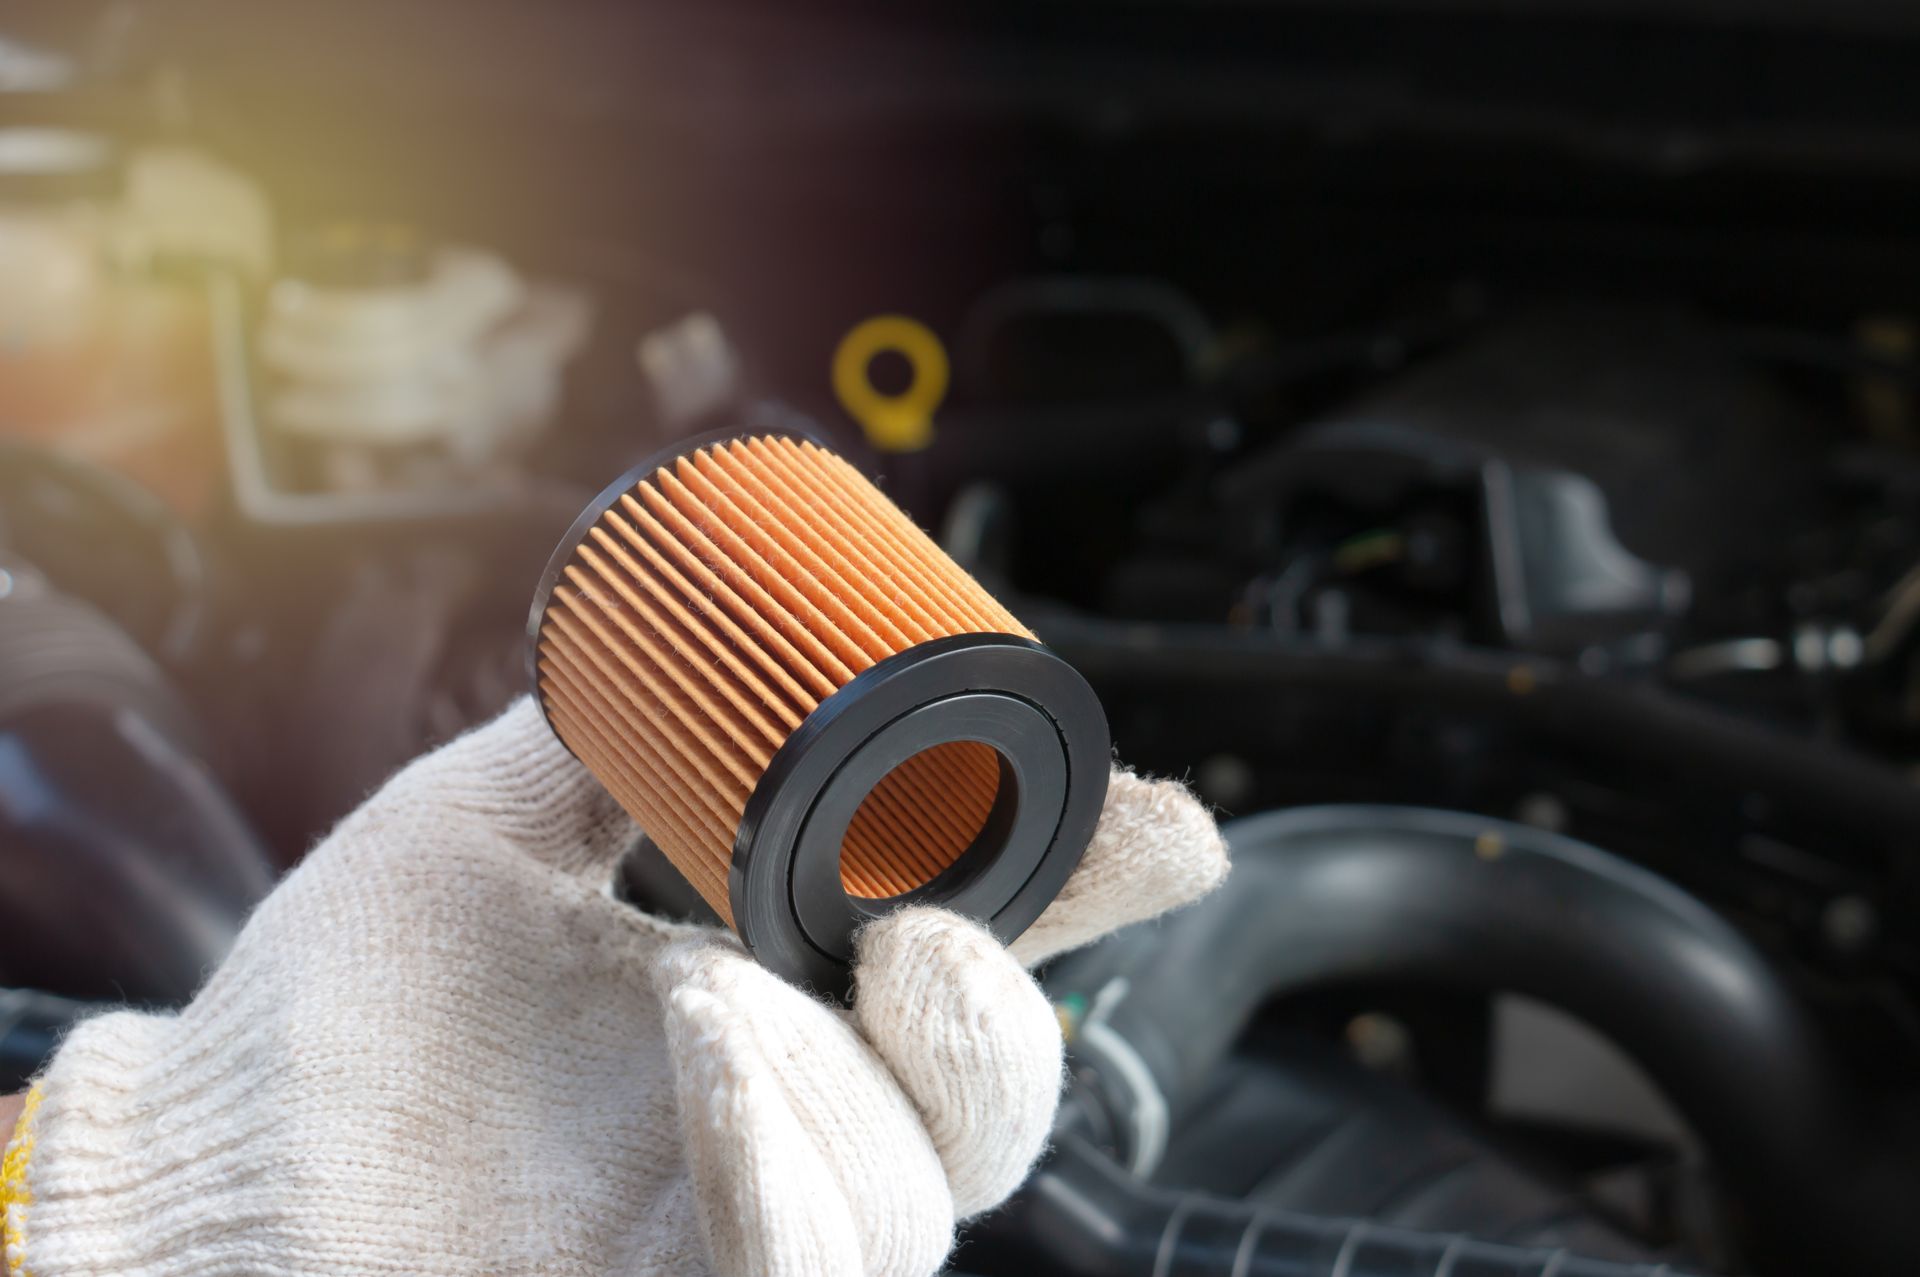 Fuel Filter Service at ﻿808 Automotive Inc.﻿ in ﻿Hubbard, OR﻿